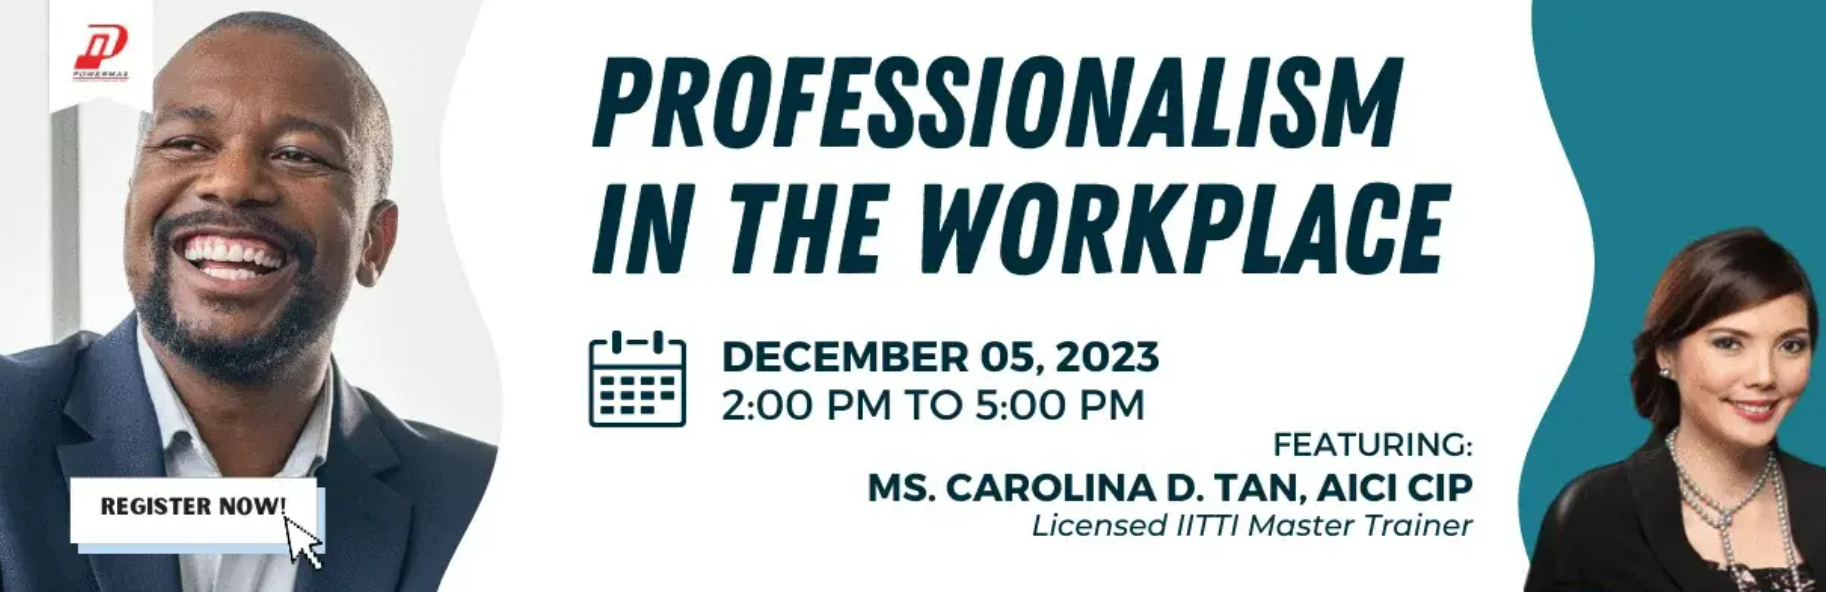 Coming Soon! PROFESSIONALISM IN THE WORKPLACE